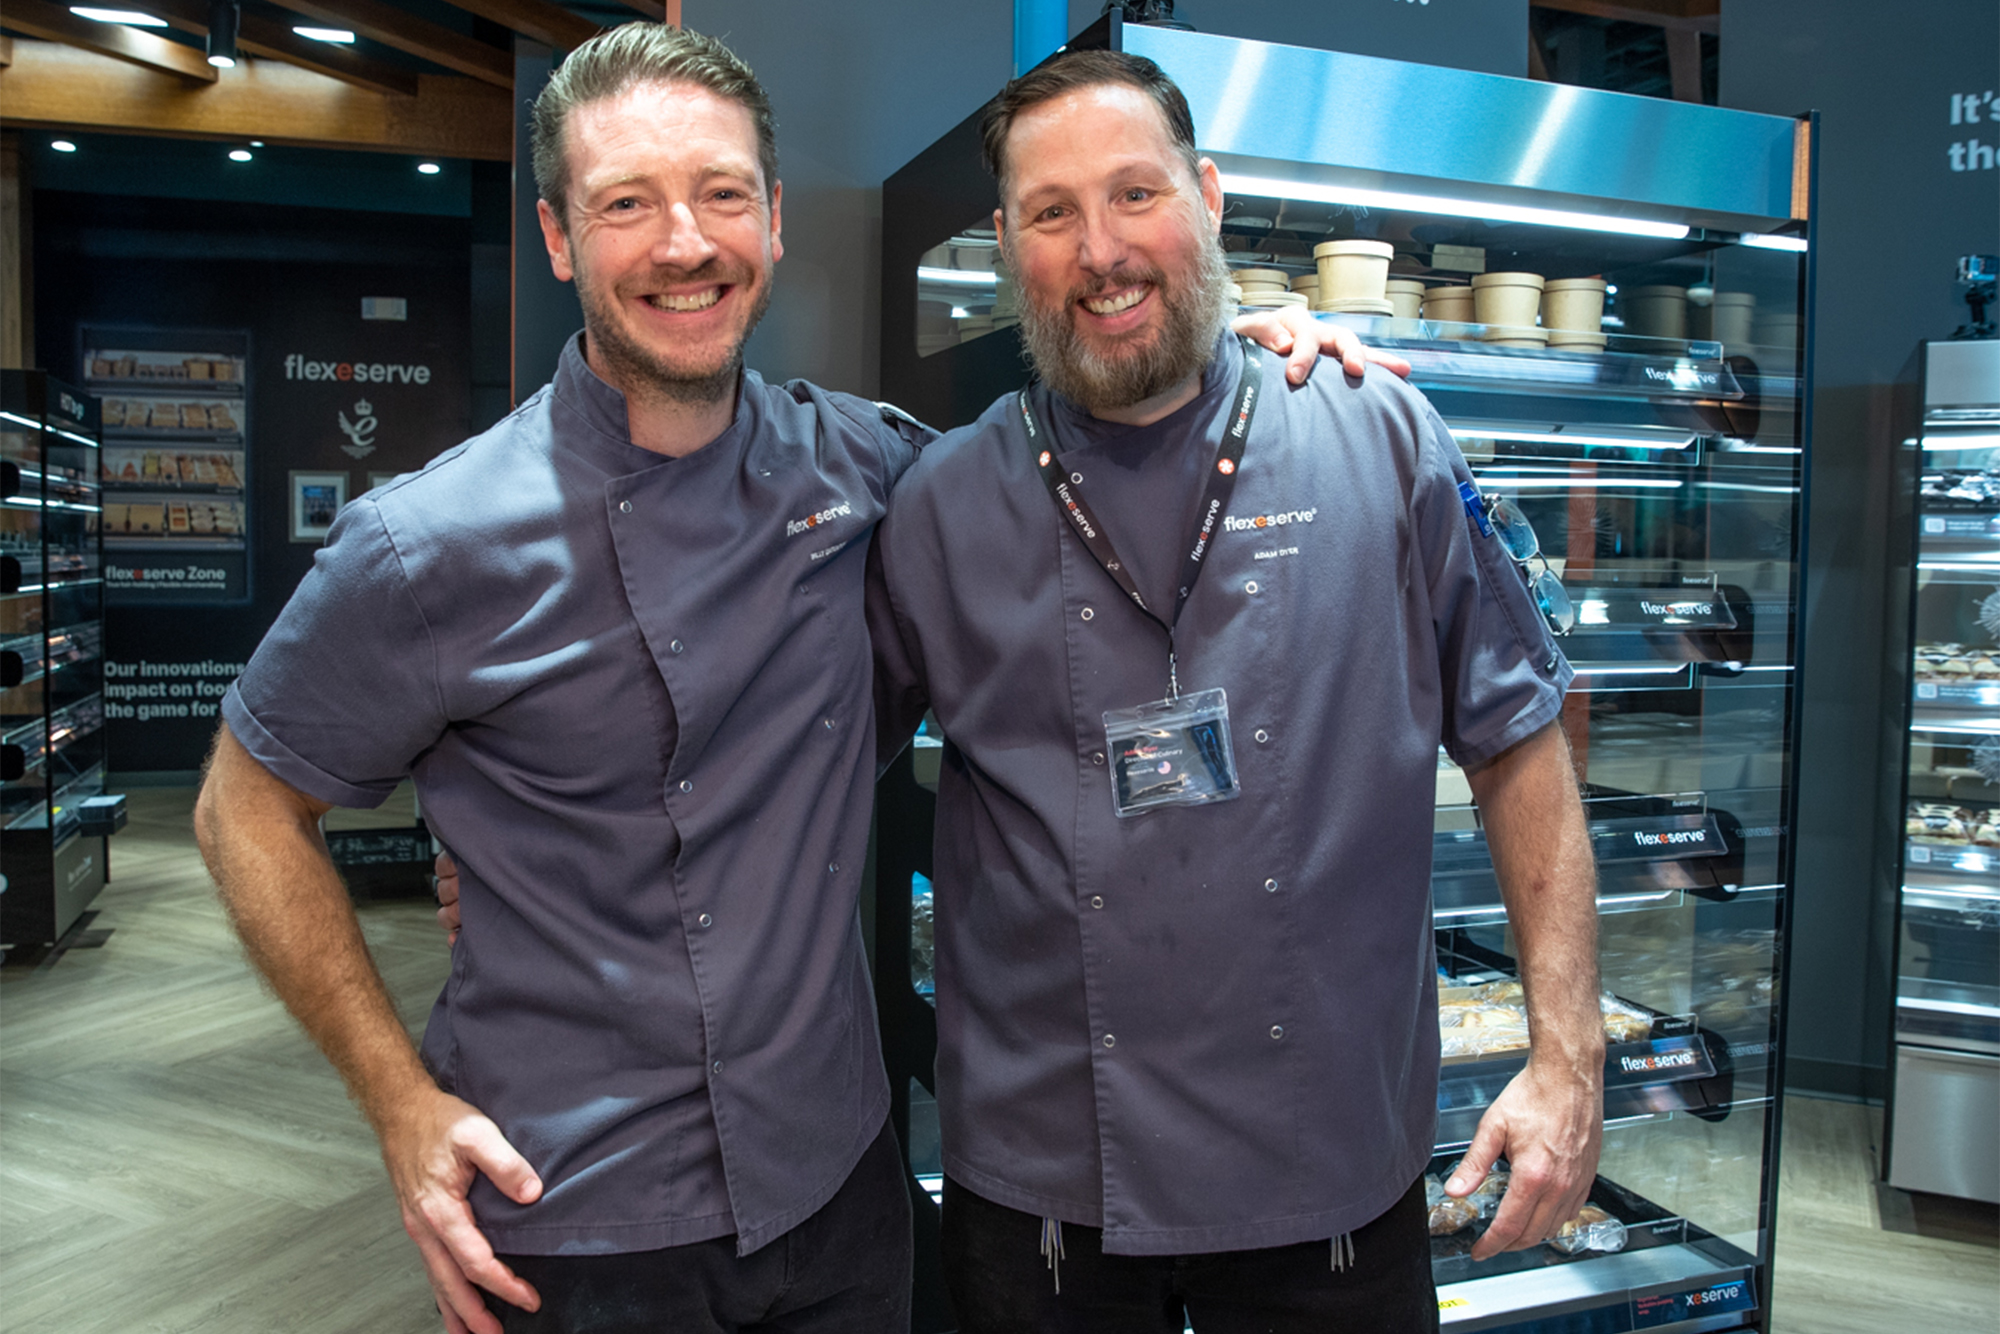 Battle of the Chefs: Flexeserve Inc.'s Grand Opening saw Head of Culinary, Billy Eatenton, and Director of Culinary for Flexeserve Inc., Adam Dyer, put their expertise to the test